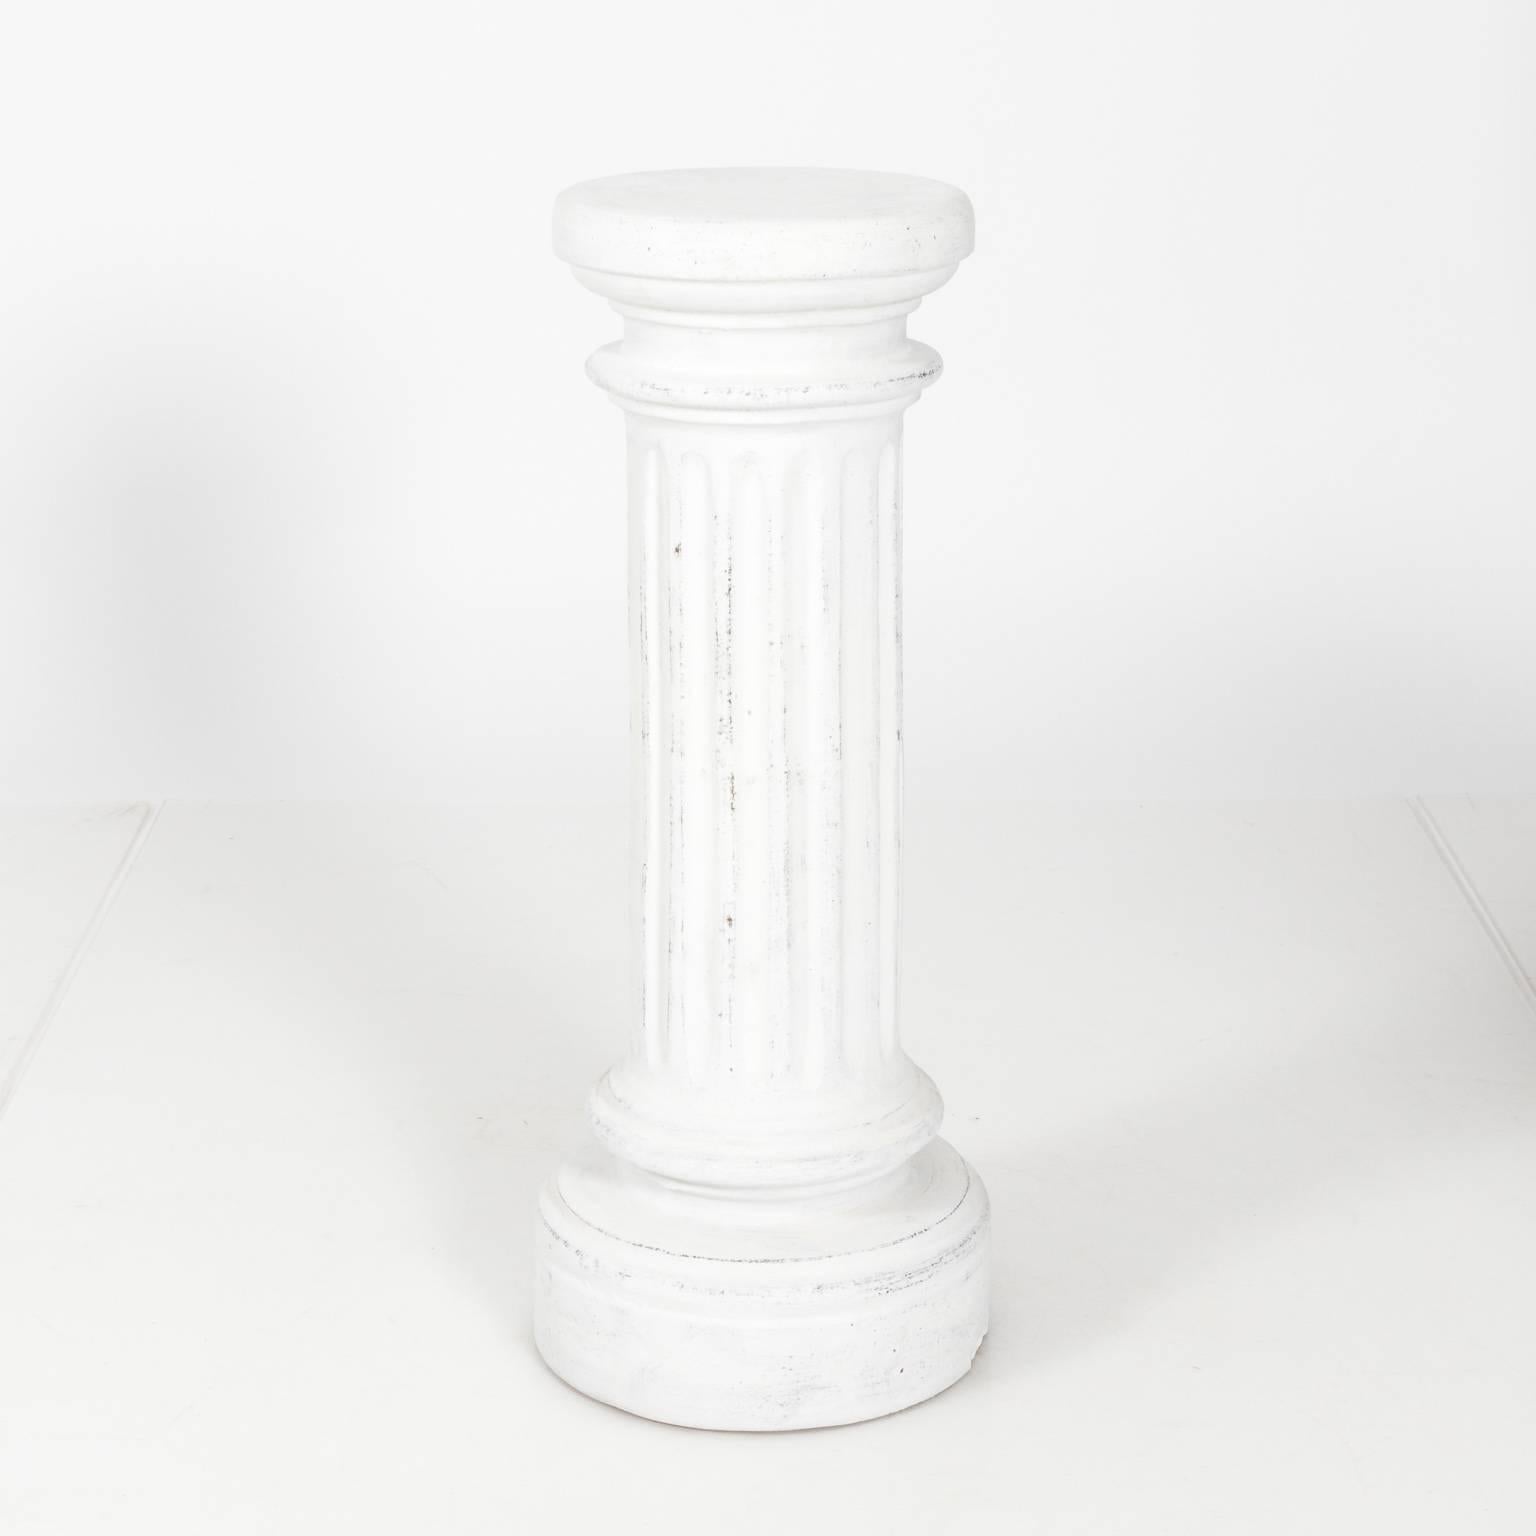 Pair of fluted column pedestals in a white painted finish, circa 20th century.